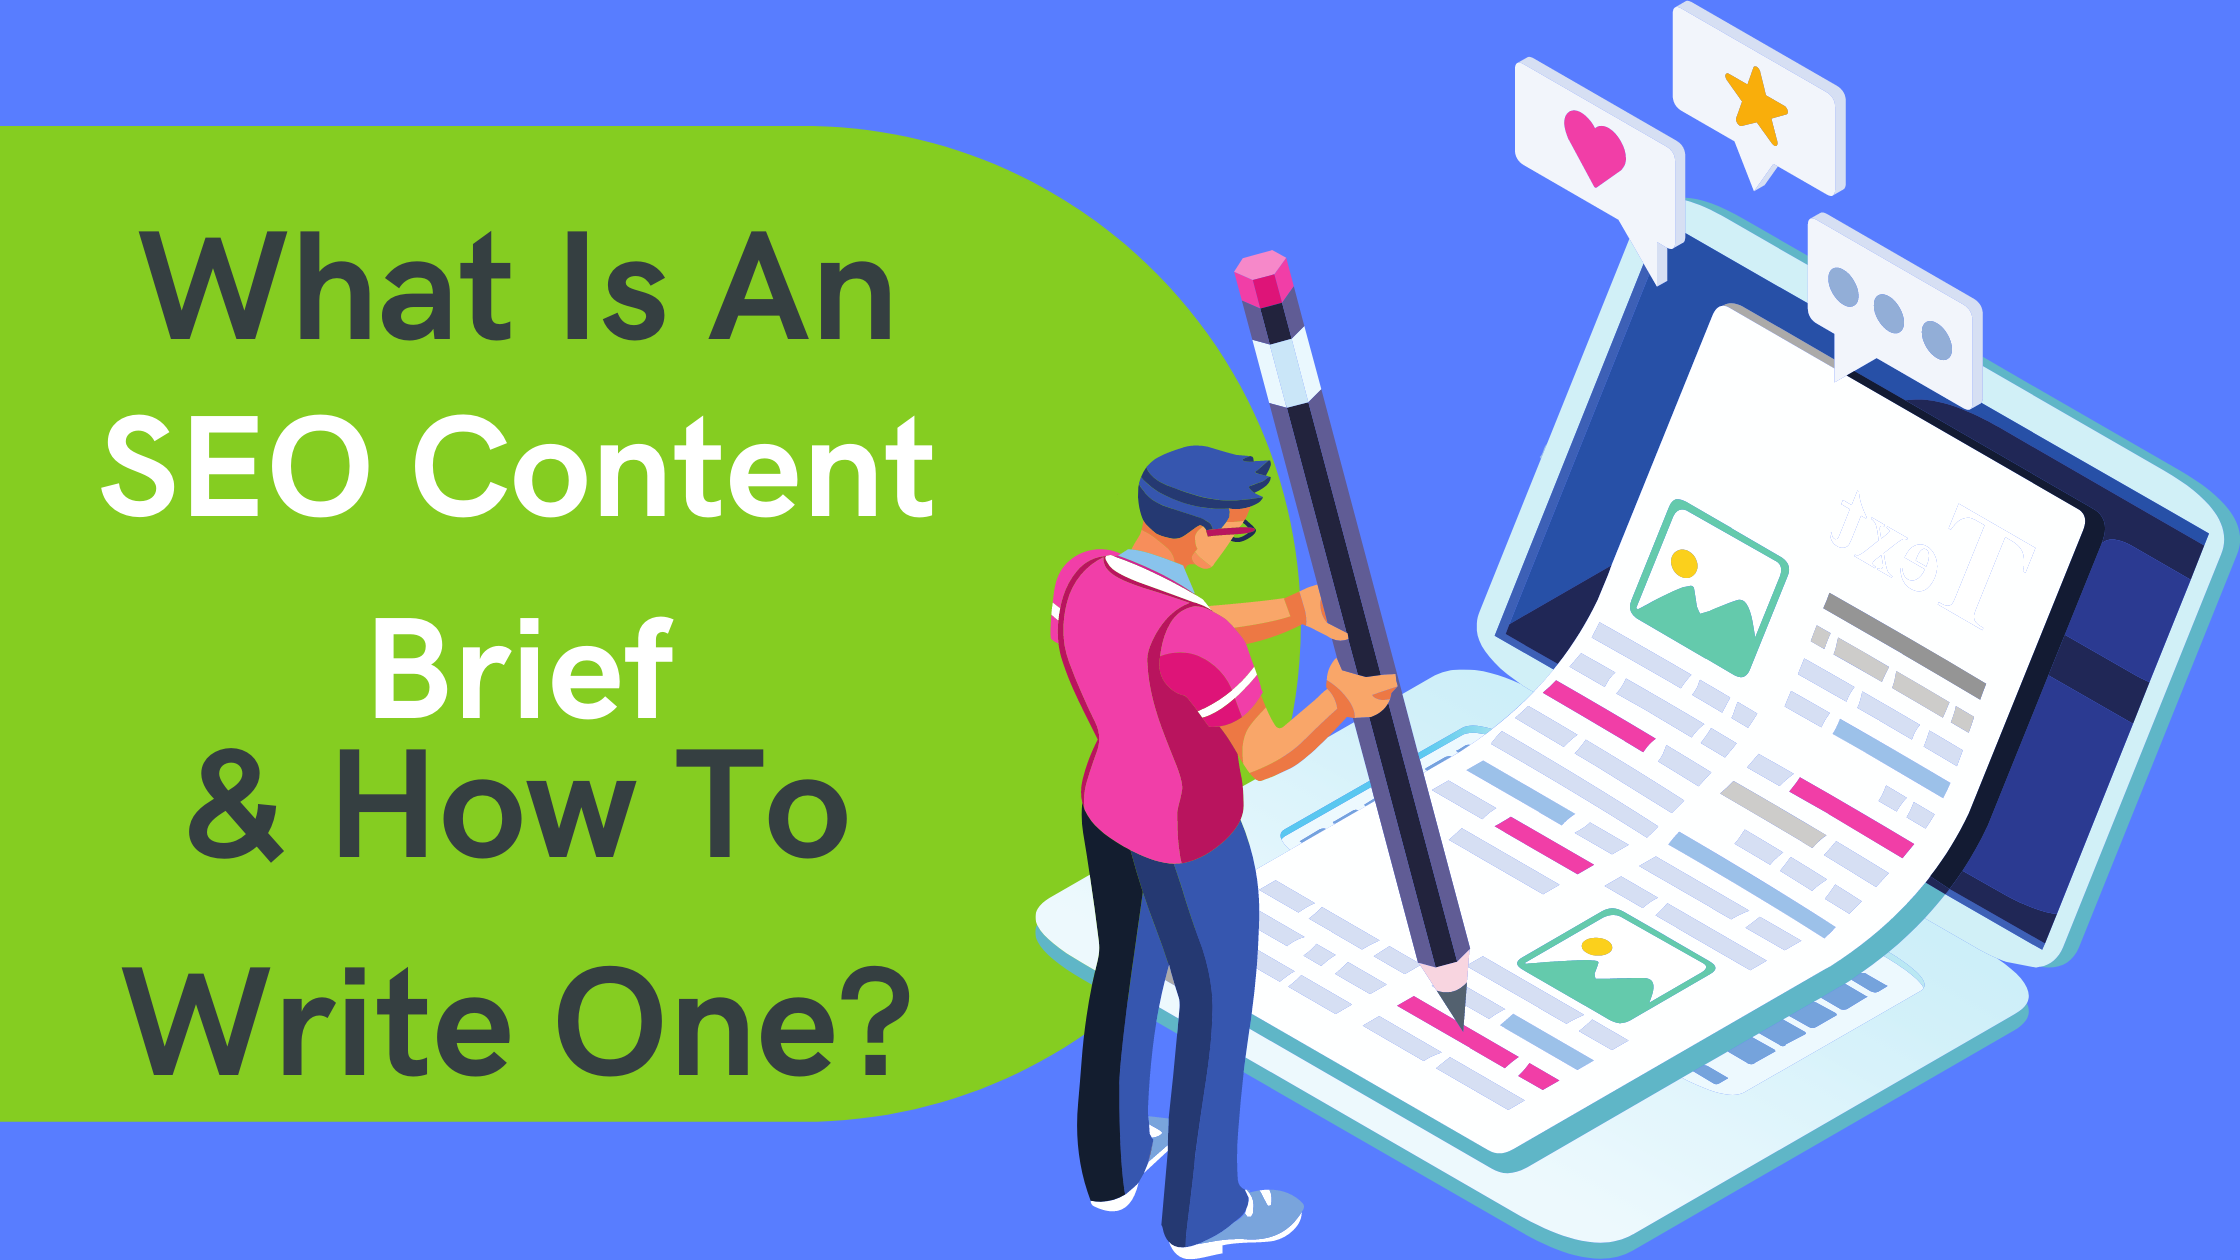 What Is An SEO Content Brief